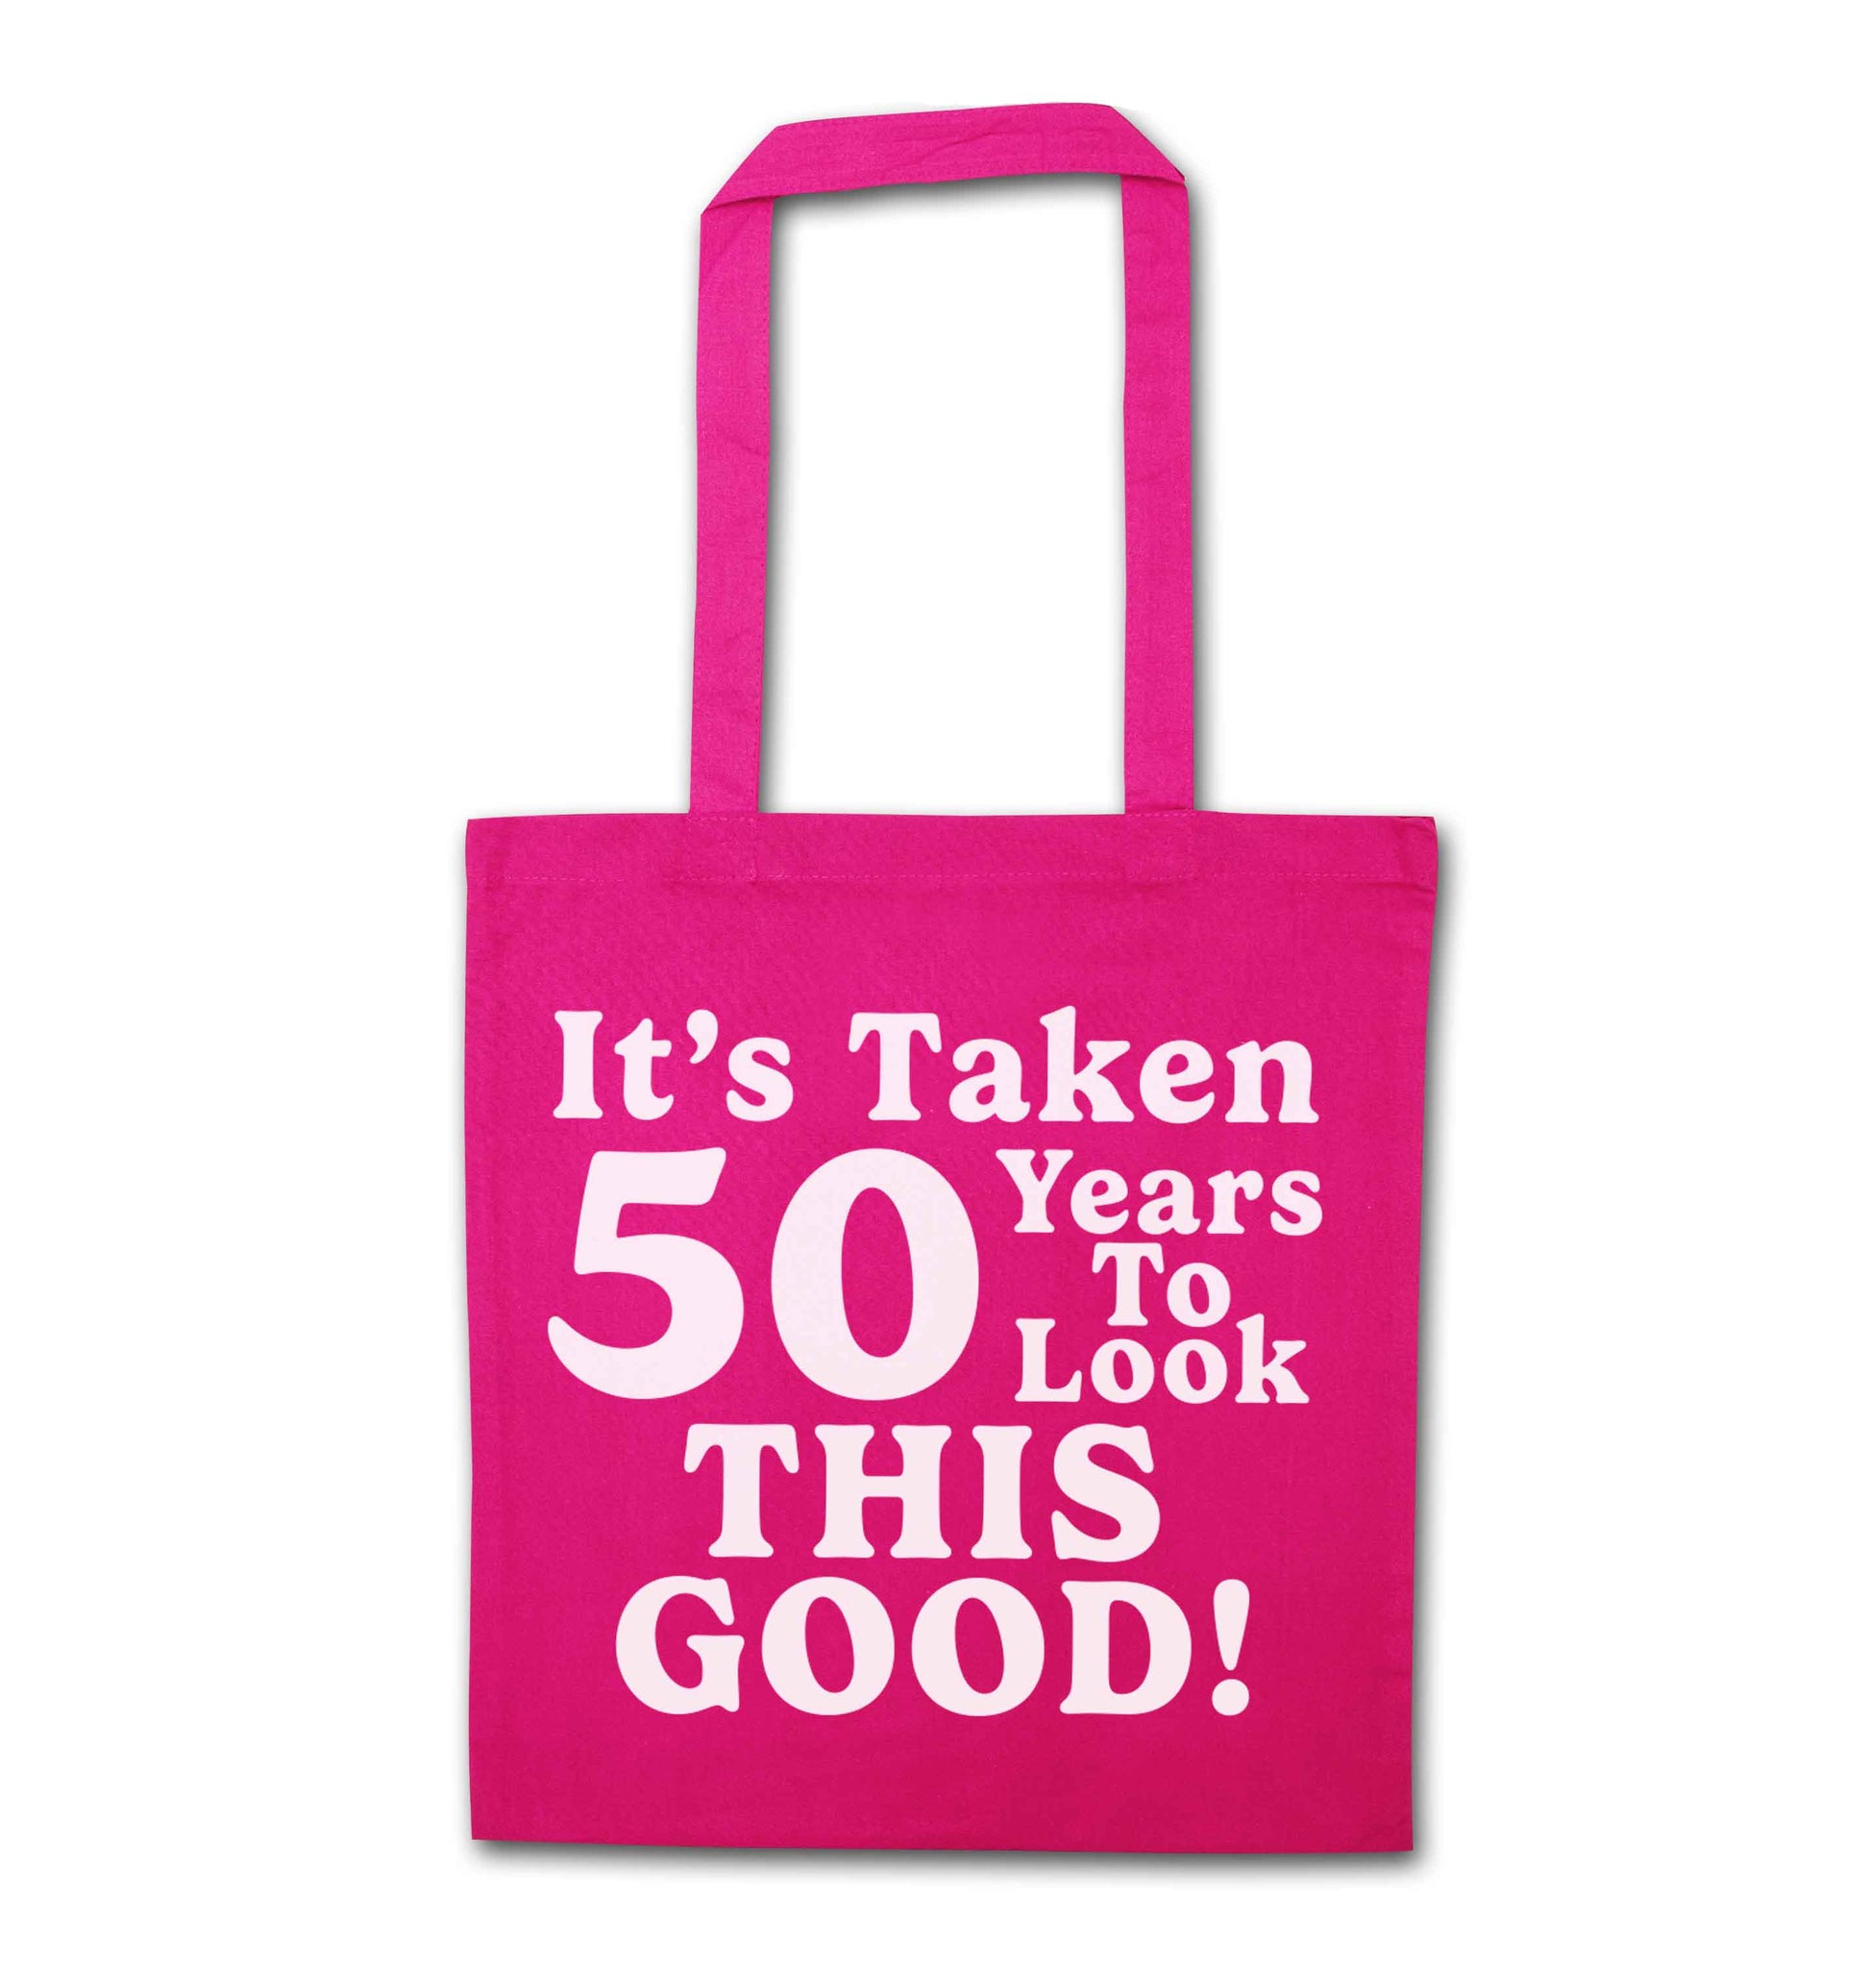 It's taken 50 years to look this good! pink tote bag